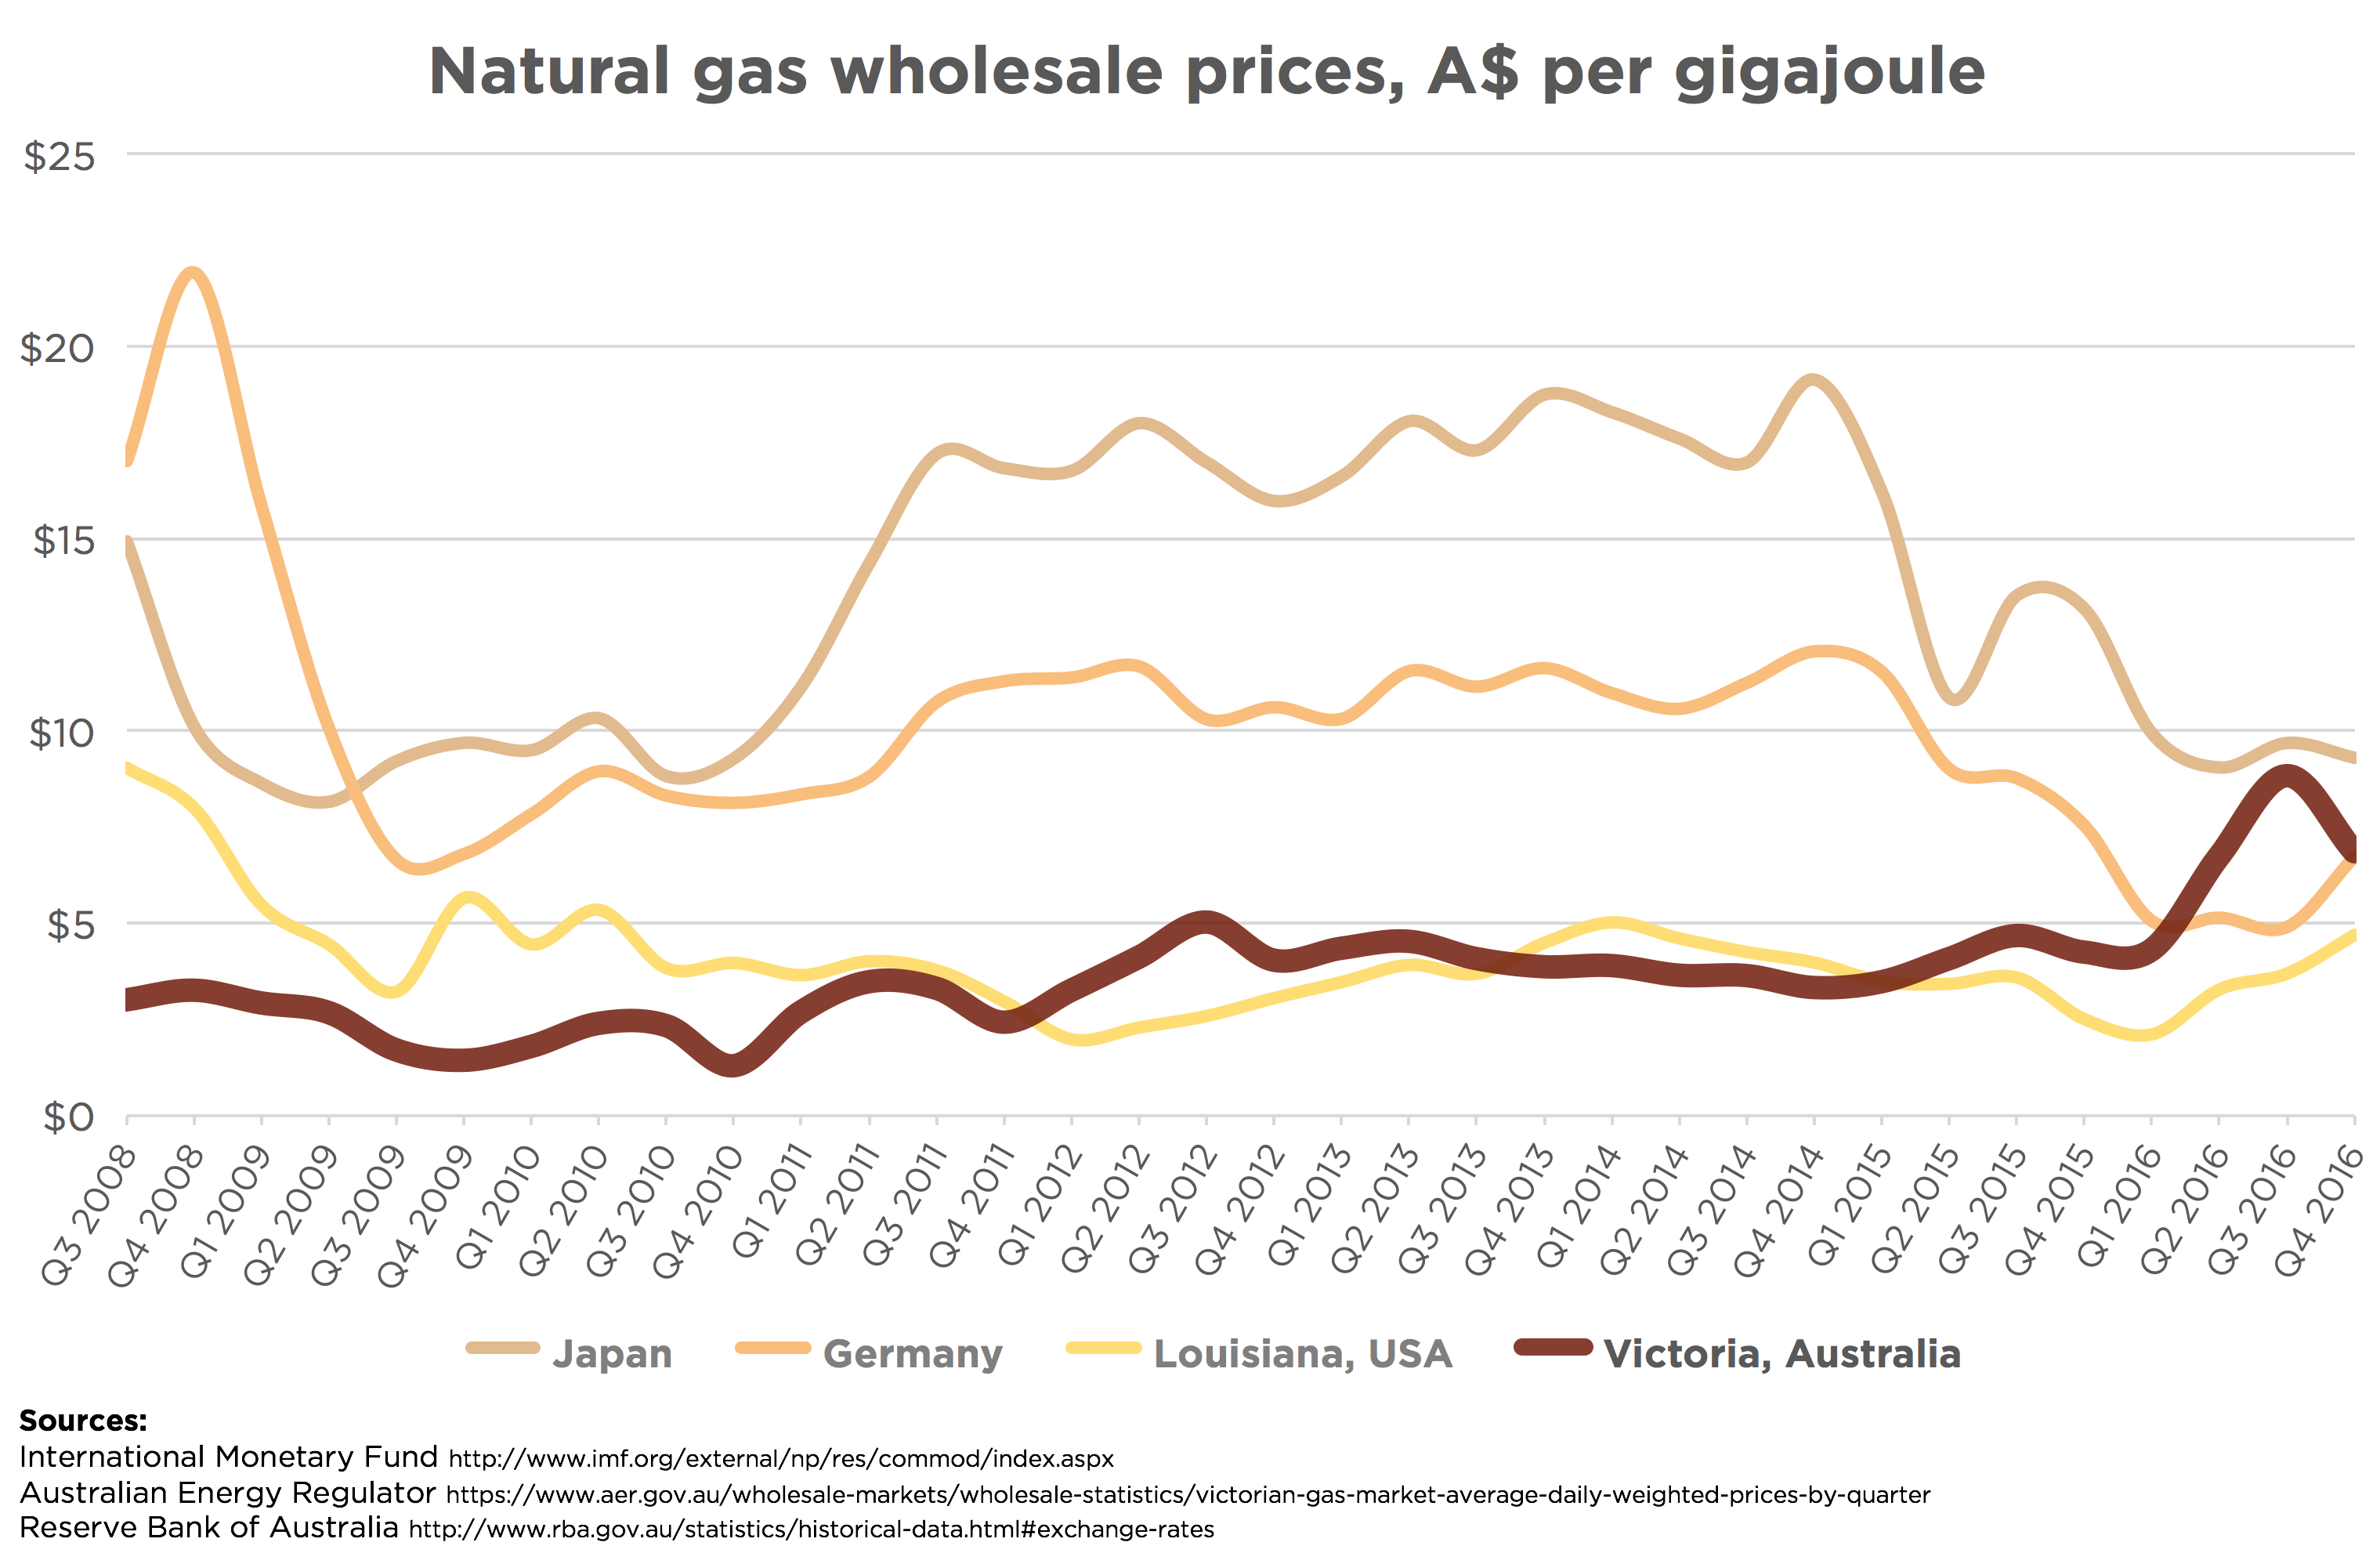 Natural gas wholesale prices, A$ per gigajoule